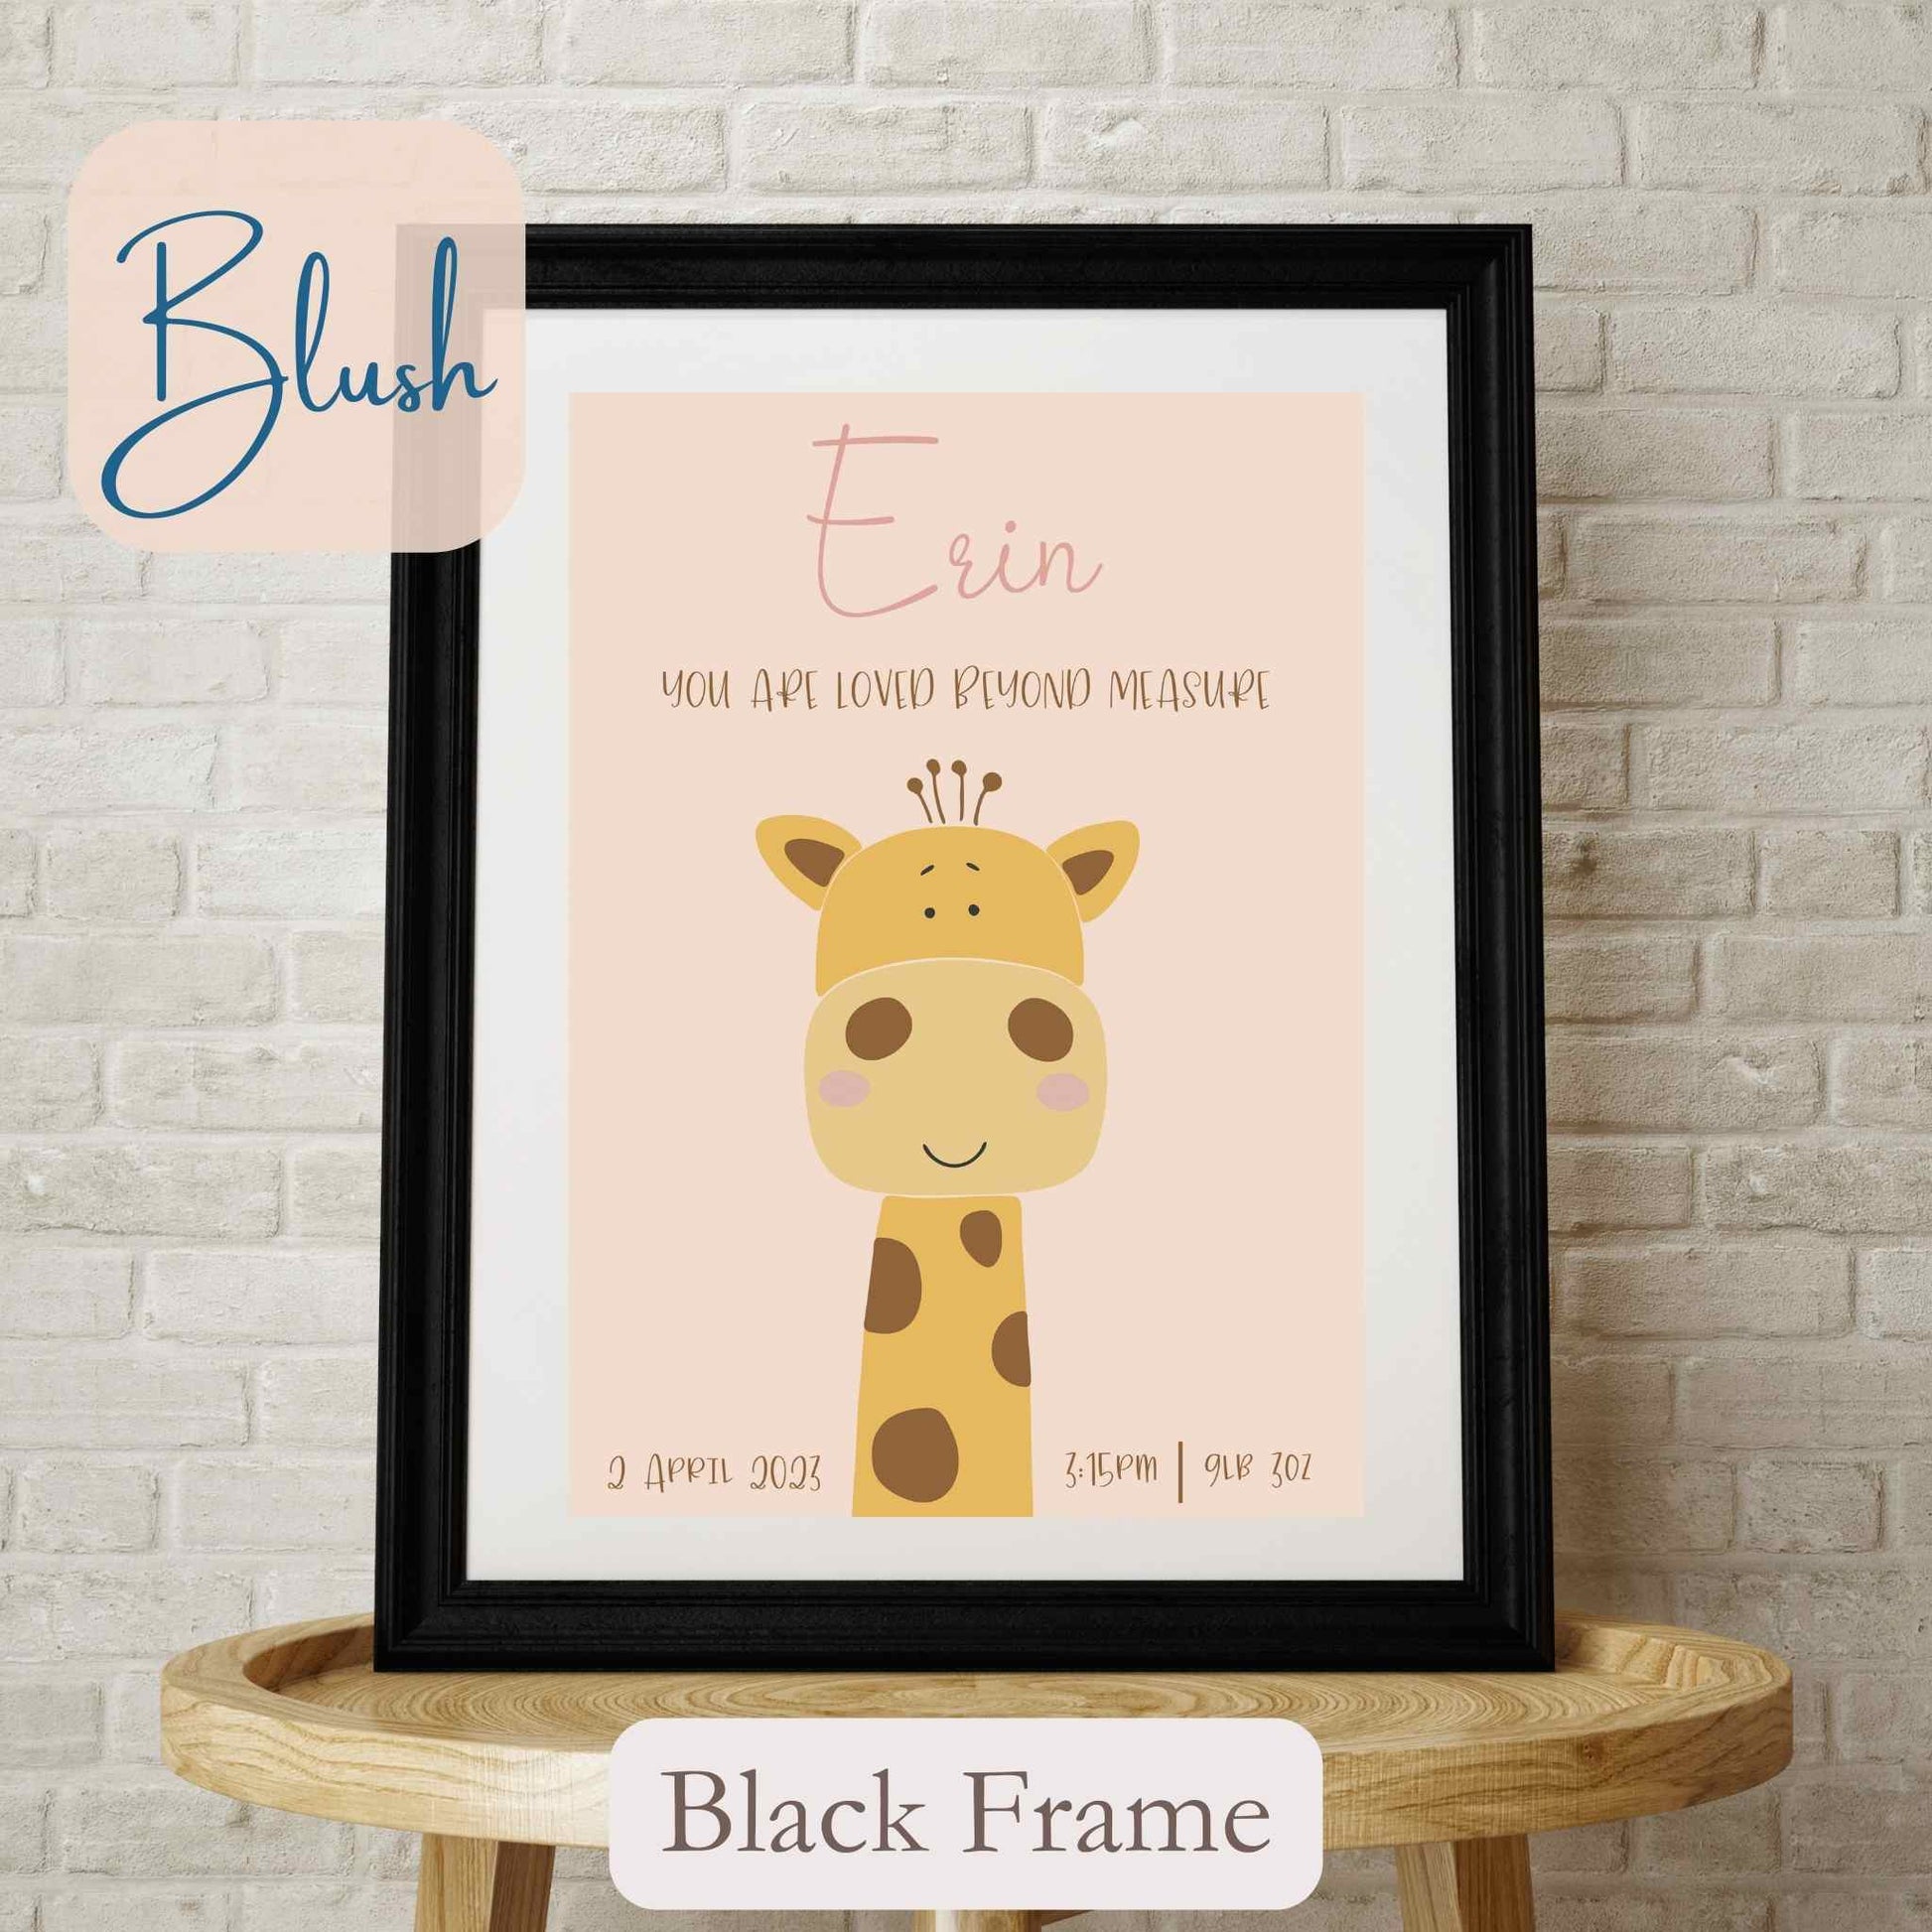 Personalised Framed Print with cute Giraffe, on blush coloured background with child’s name, and wording under name. Black Frame.